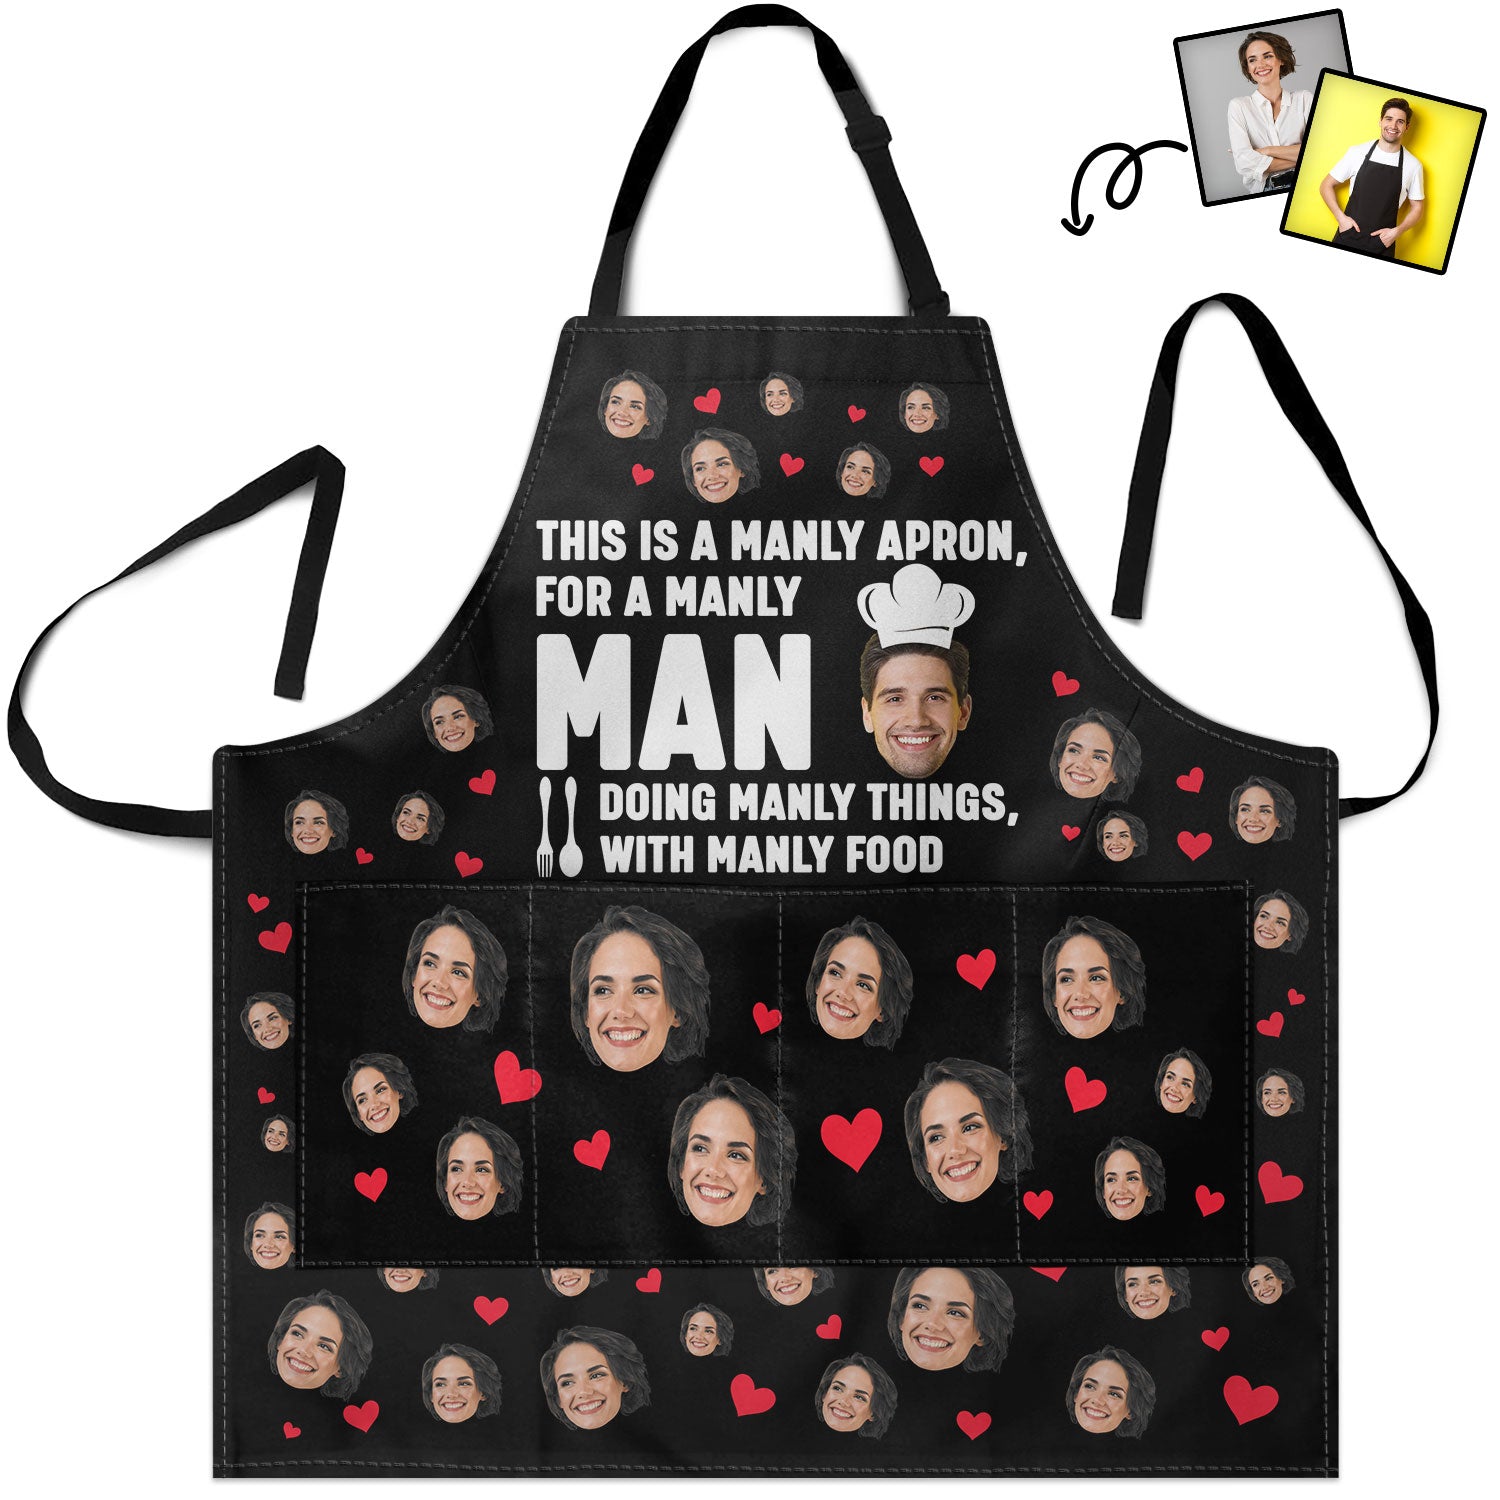 Custom Photo For A Manly Man Doing Manly Things - Birthday, Anniversary, Funny Gift For Men, Husband, Boyfriend, Dad - Personalized Apron